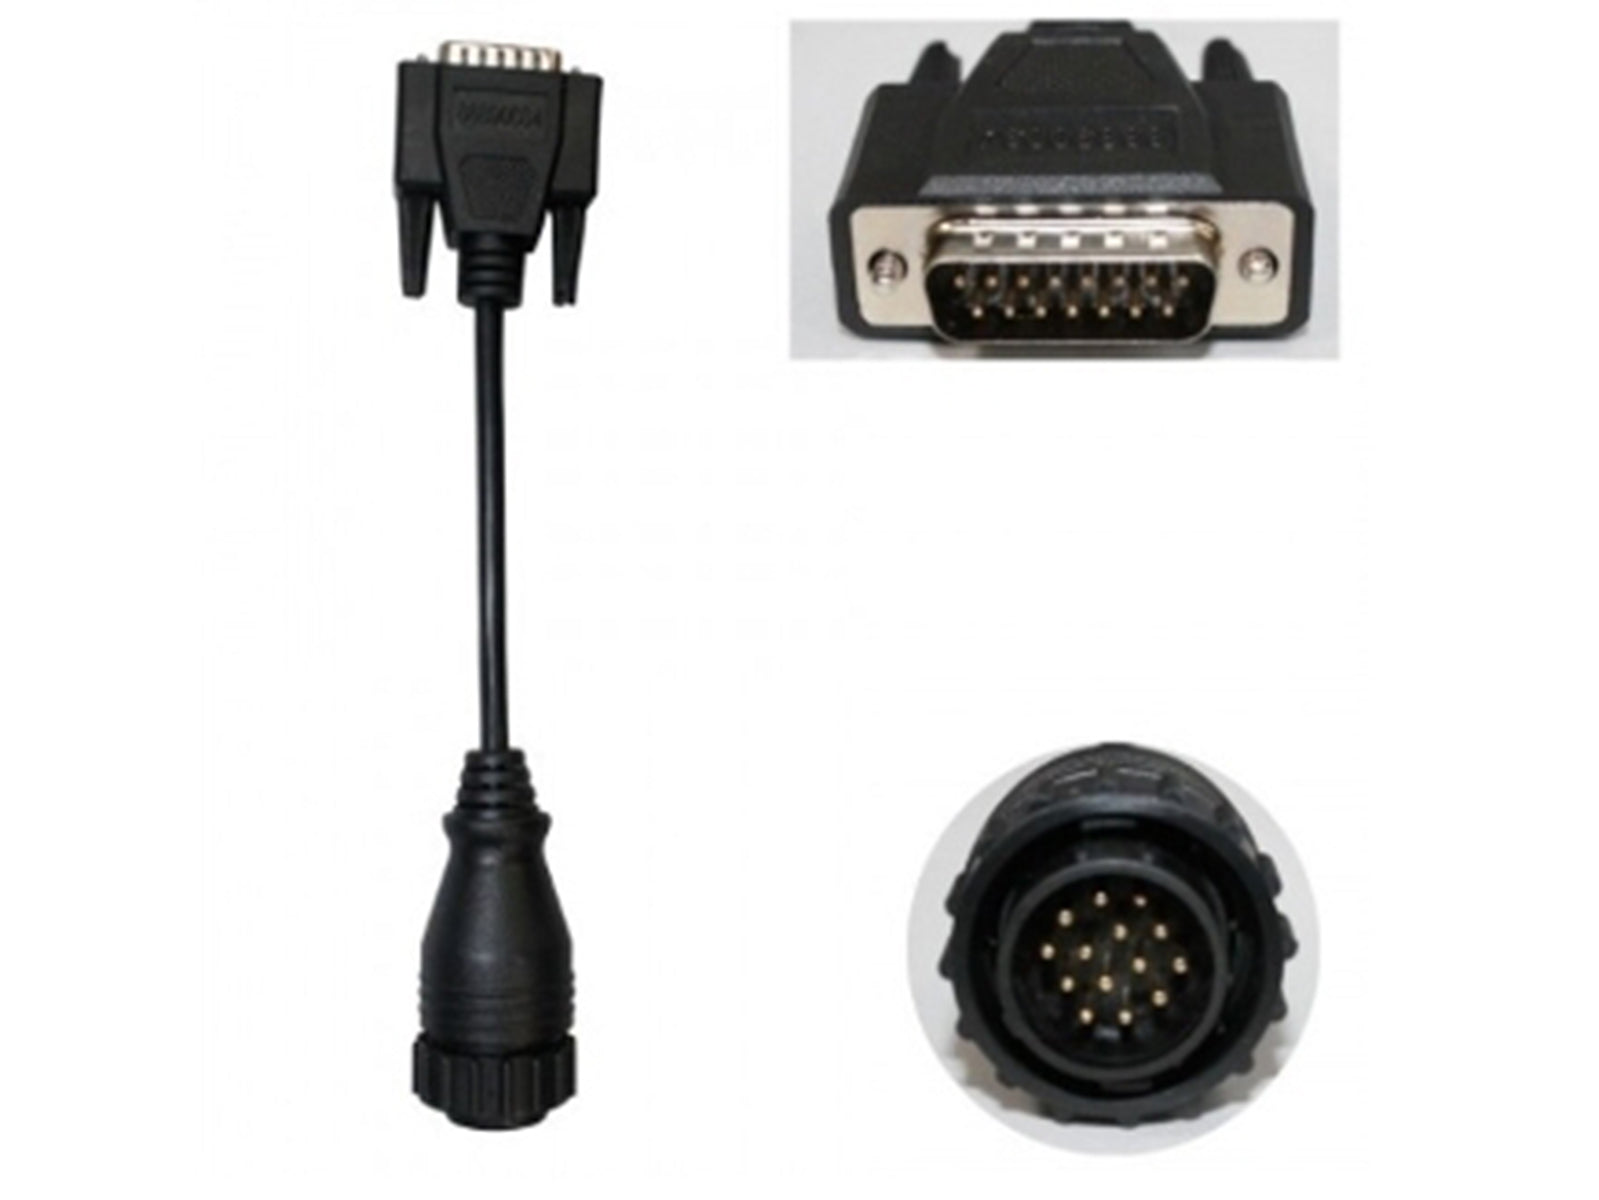 Diesel Laptops Mack & Volvo 14 Pin Cable for USB Link